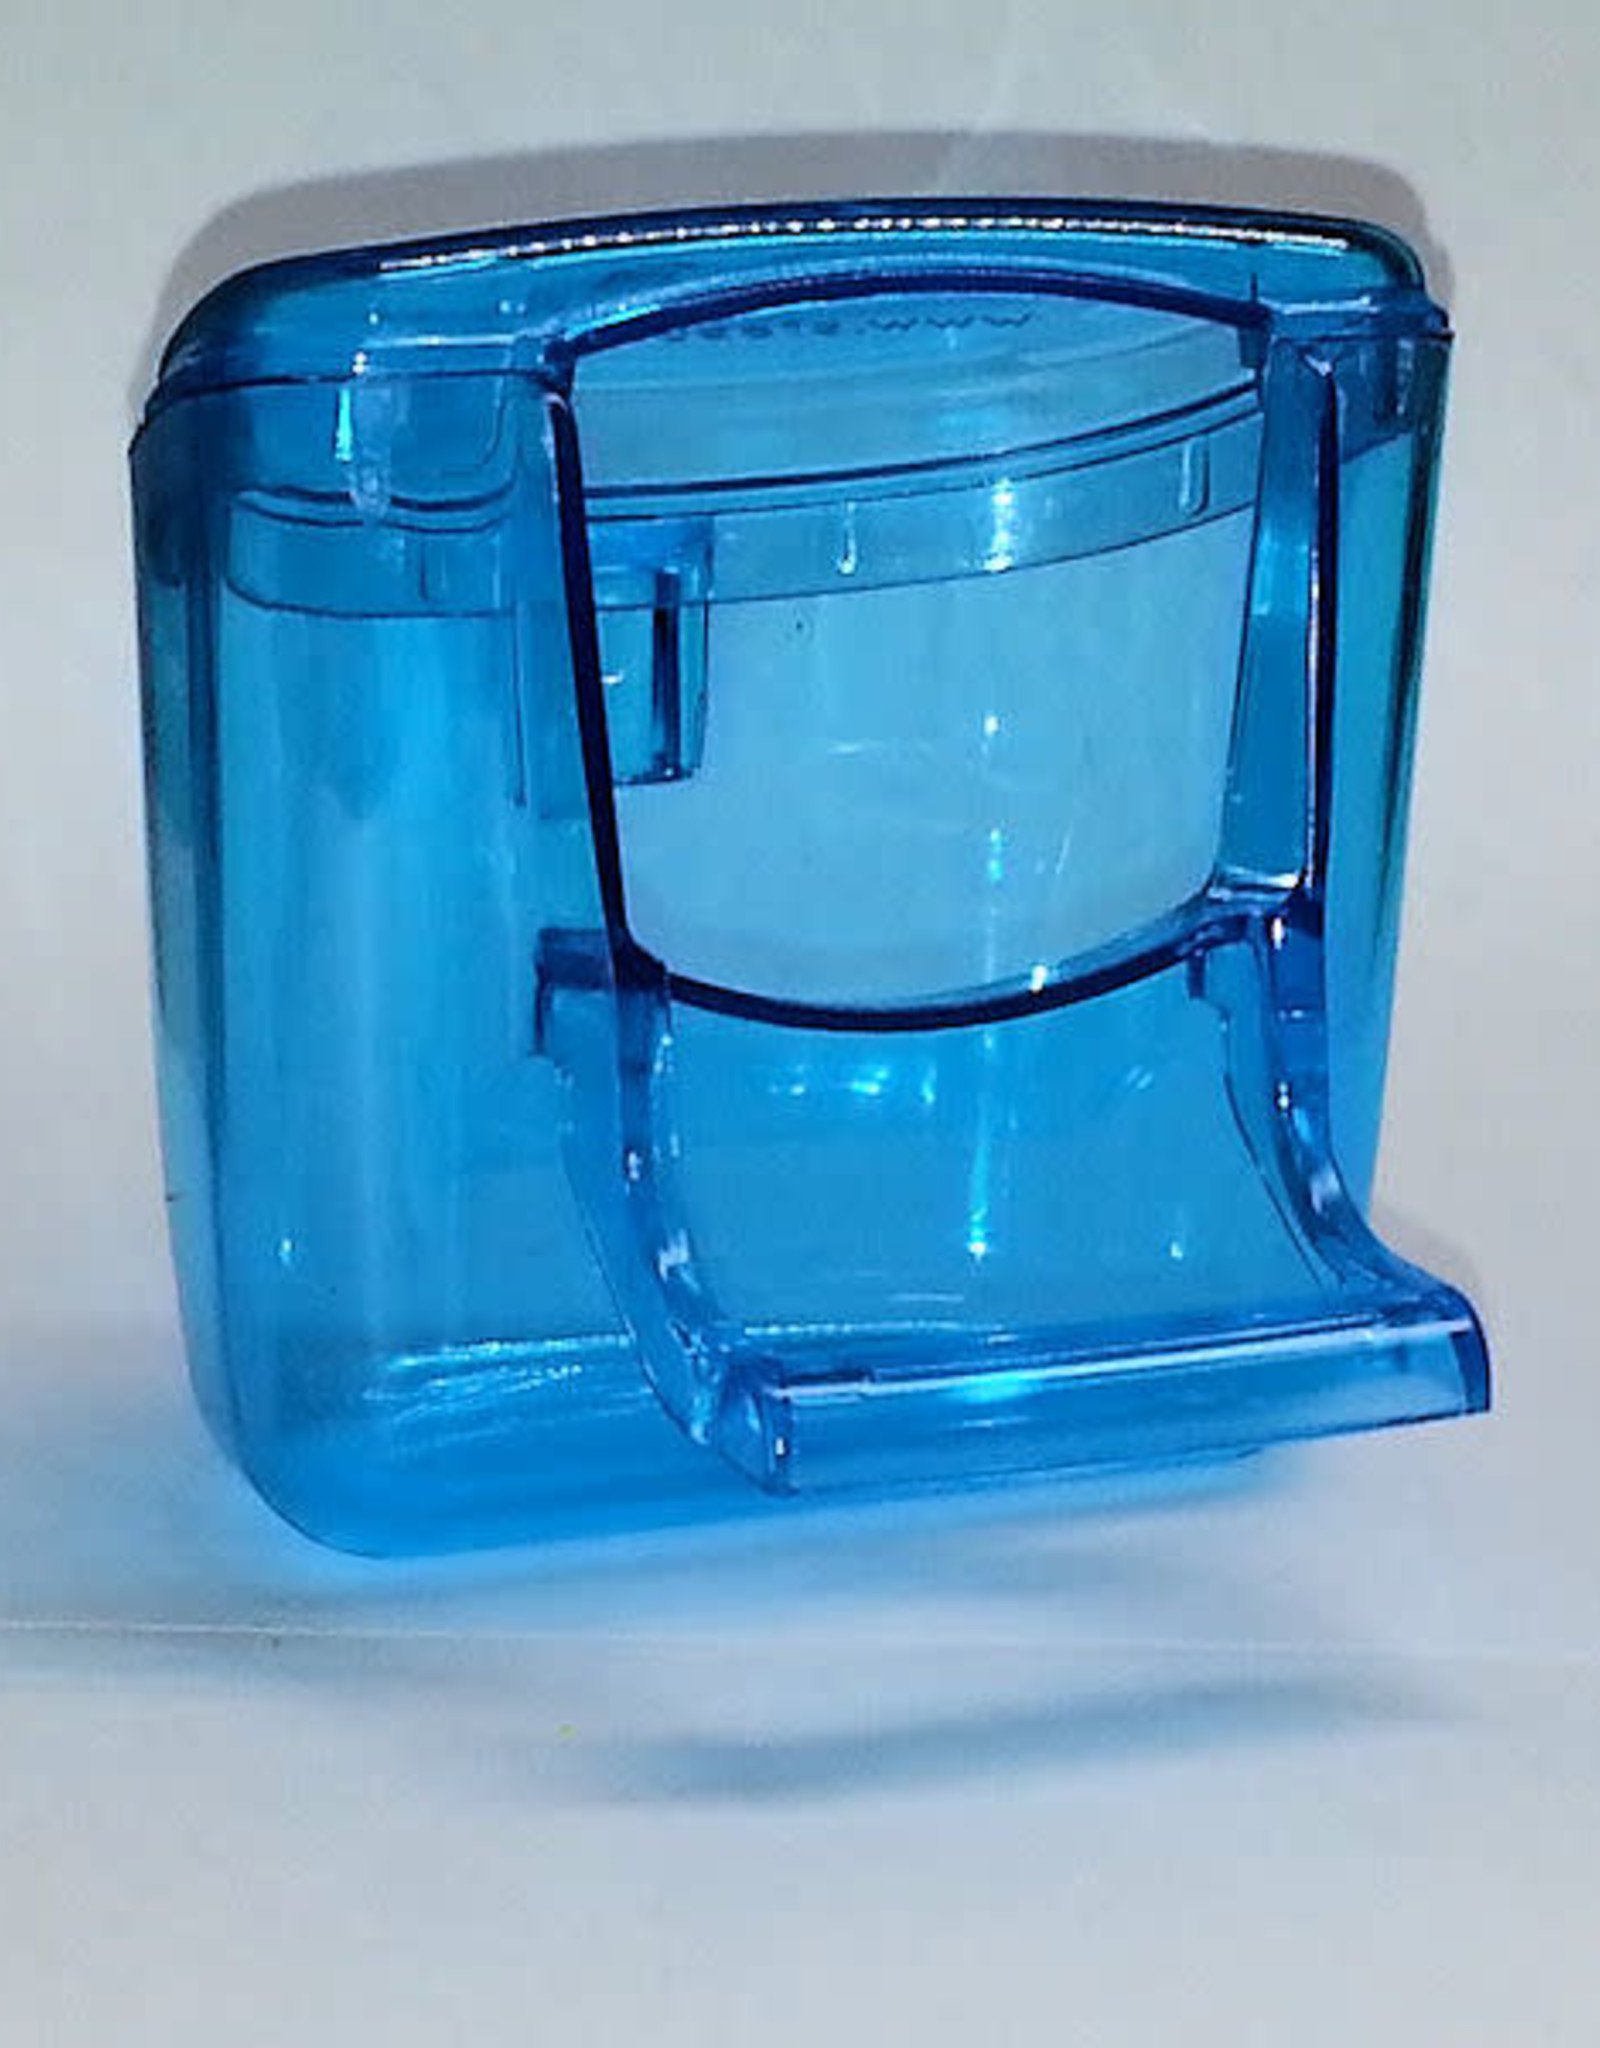 S.T.A.- CANARY FOOD/WATER DISH- 3X3X1.5- NEW STYLE- BLUE